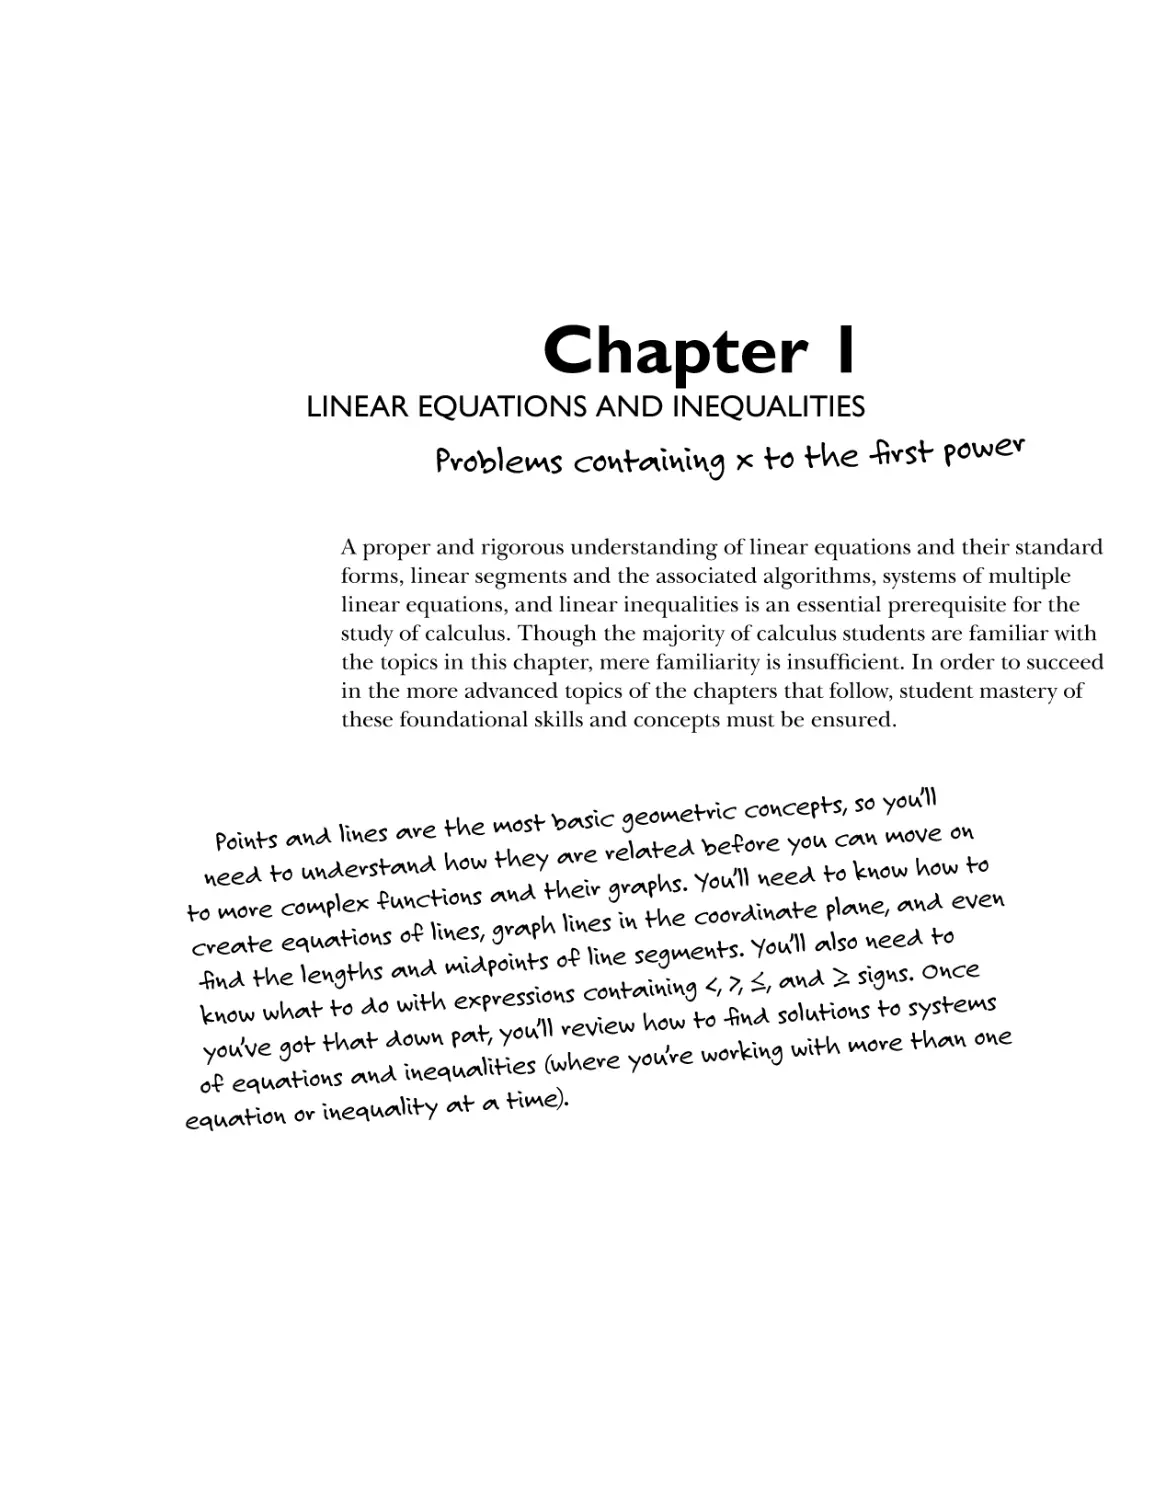 Chapter 1: Linear Equations and Inequalities 1